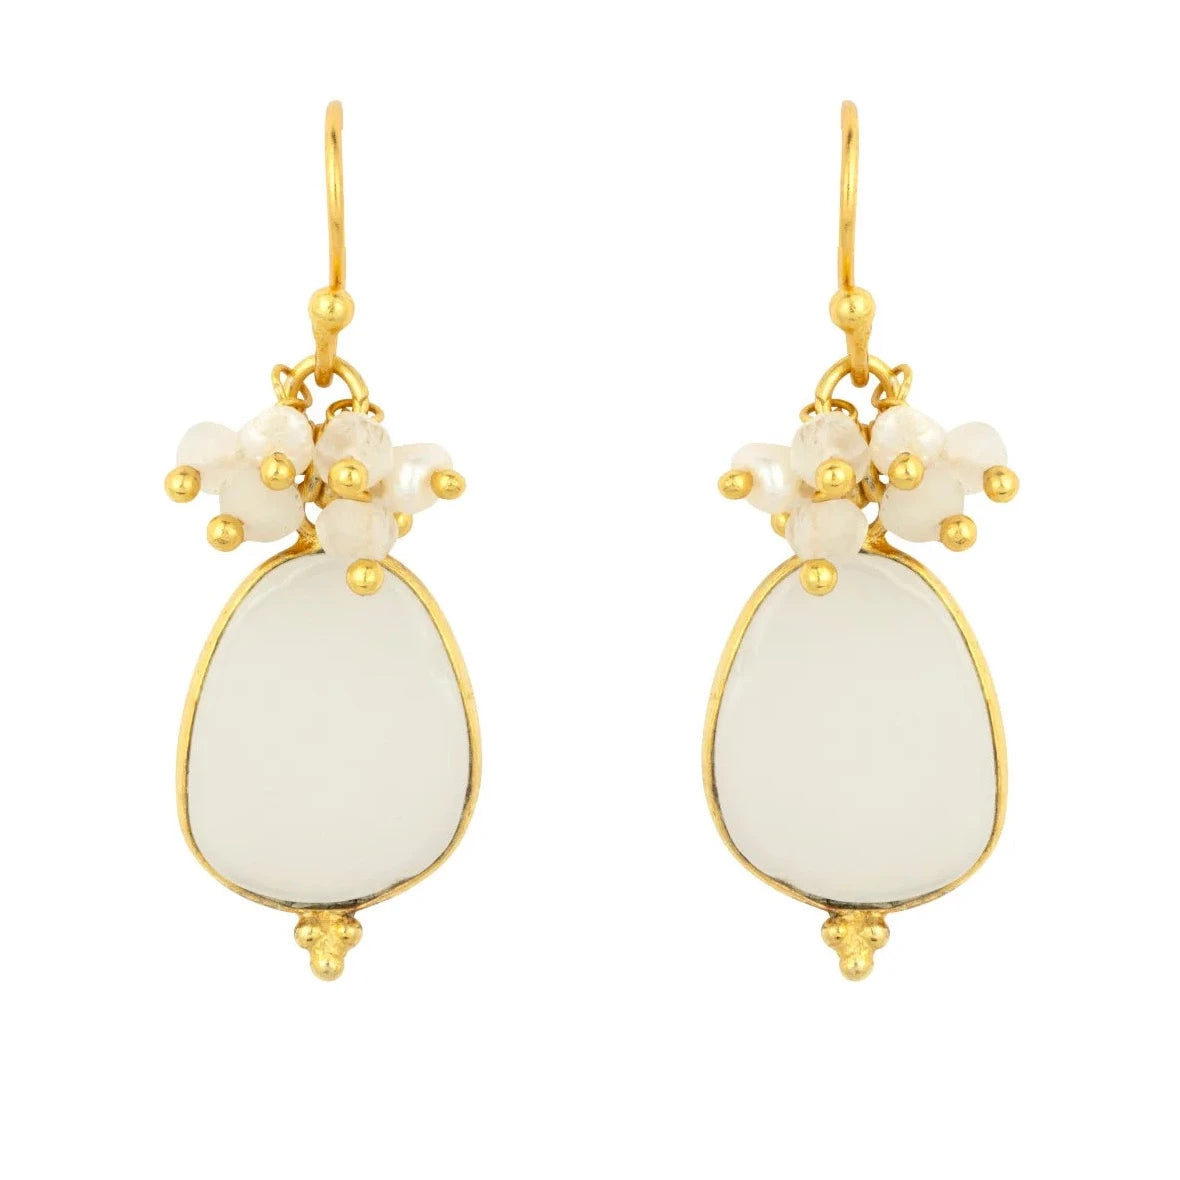 Discover the timeless elegance of our white chalcedony earrings, from Mazzi D Fiori, adorned with a hand-wired cluster of semi-precious stones. This best-selling piece features stunning freshwater pearls and moonstone, finished with an organic-shaped white chalcedony drop. With its striking design and wearability, it's the perfect addition to your jewelry collection for years to come.